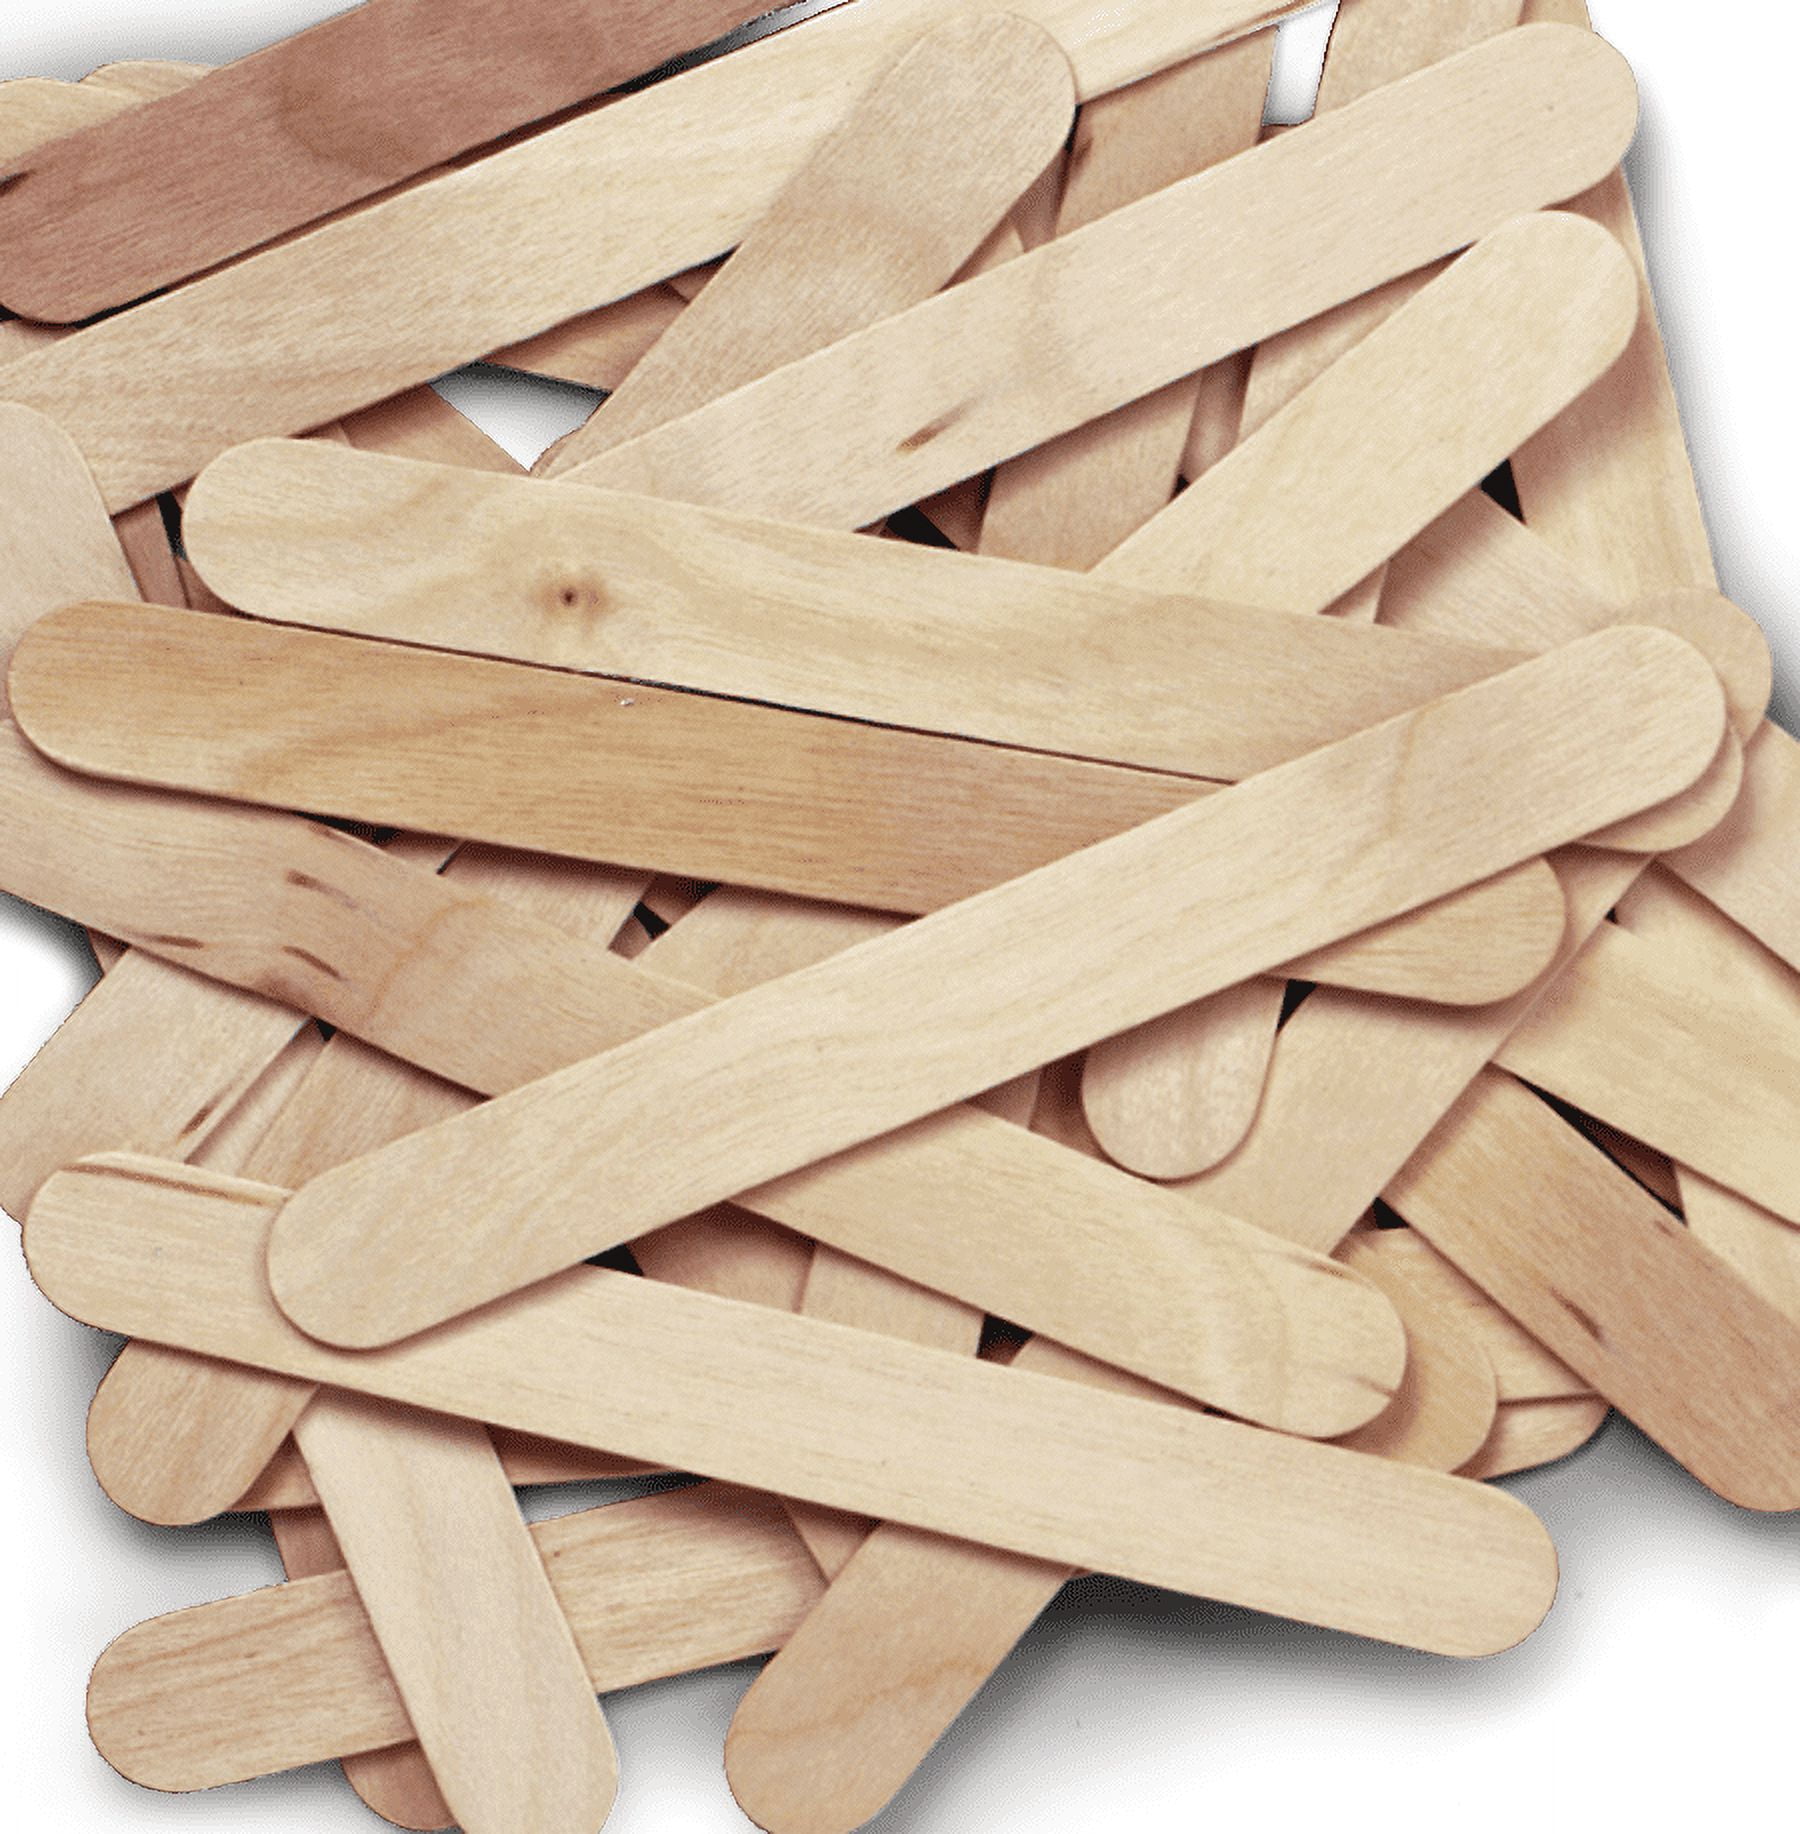 New potential hobby resource? $3 Walmart “Skill Sticks”. Weird notched  popsicle sticks for quick building. Not the prettiest build material but  lots of versatility! What would you build with this stuff? Looking